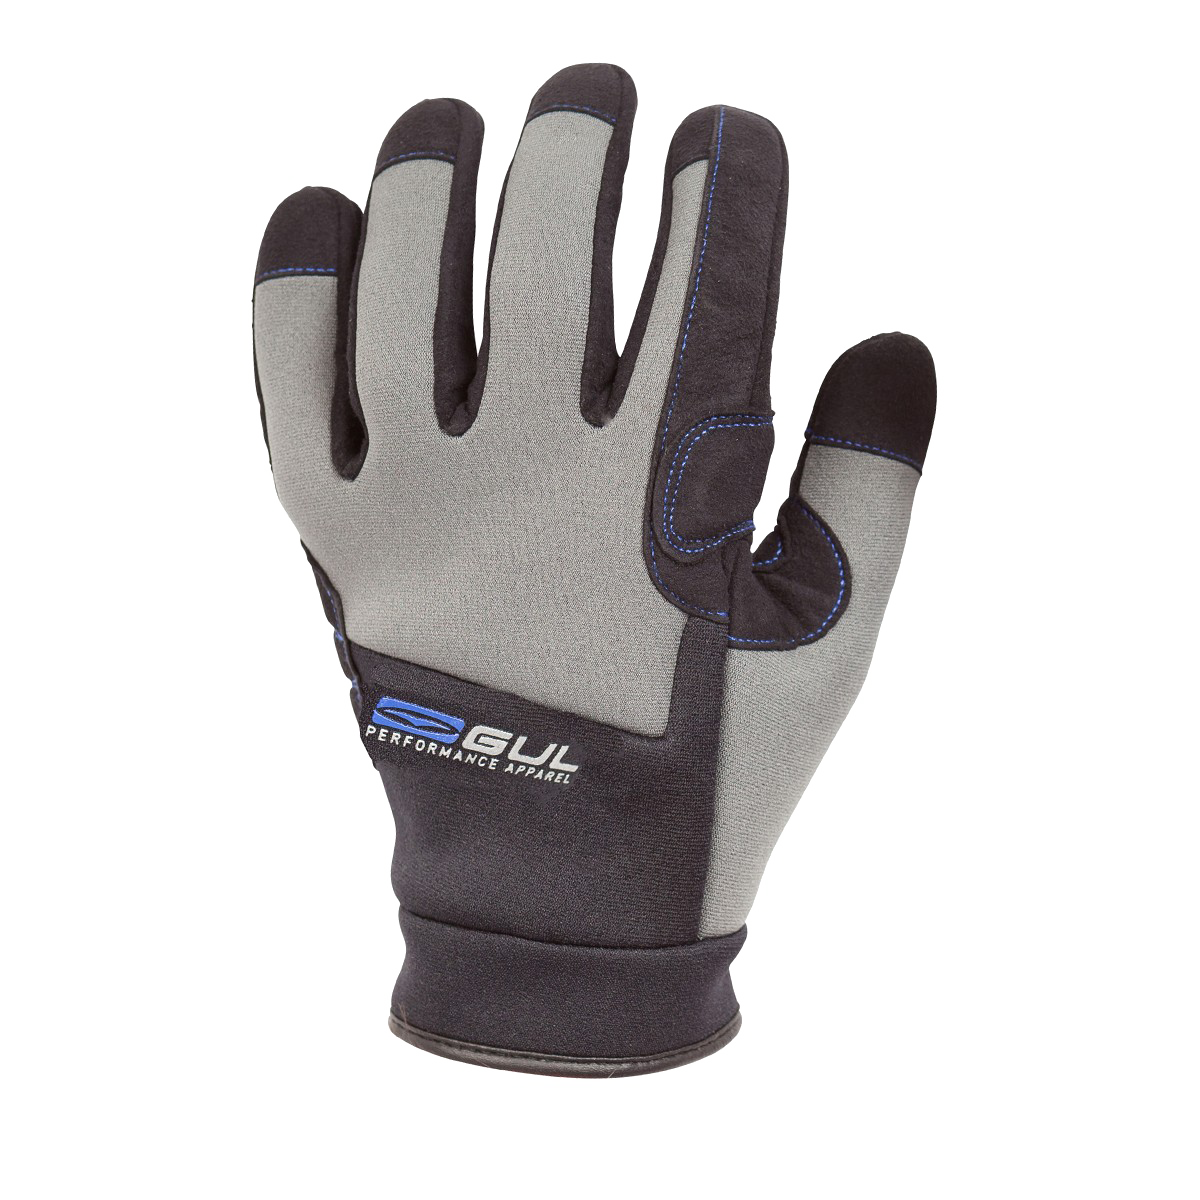 Winter Gloves Download HD PNG PNG Image